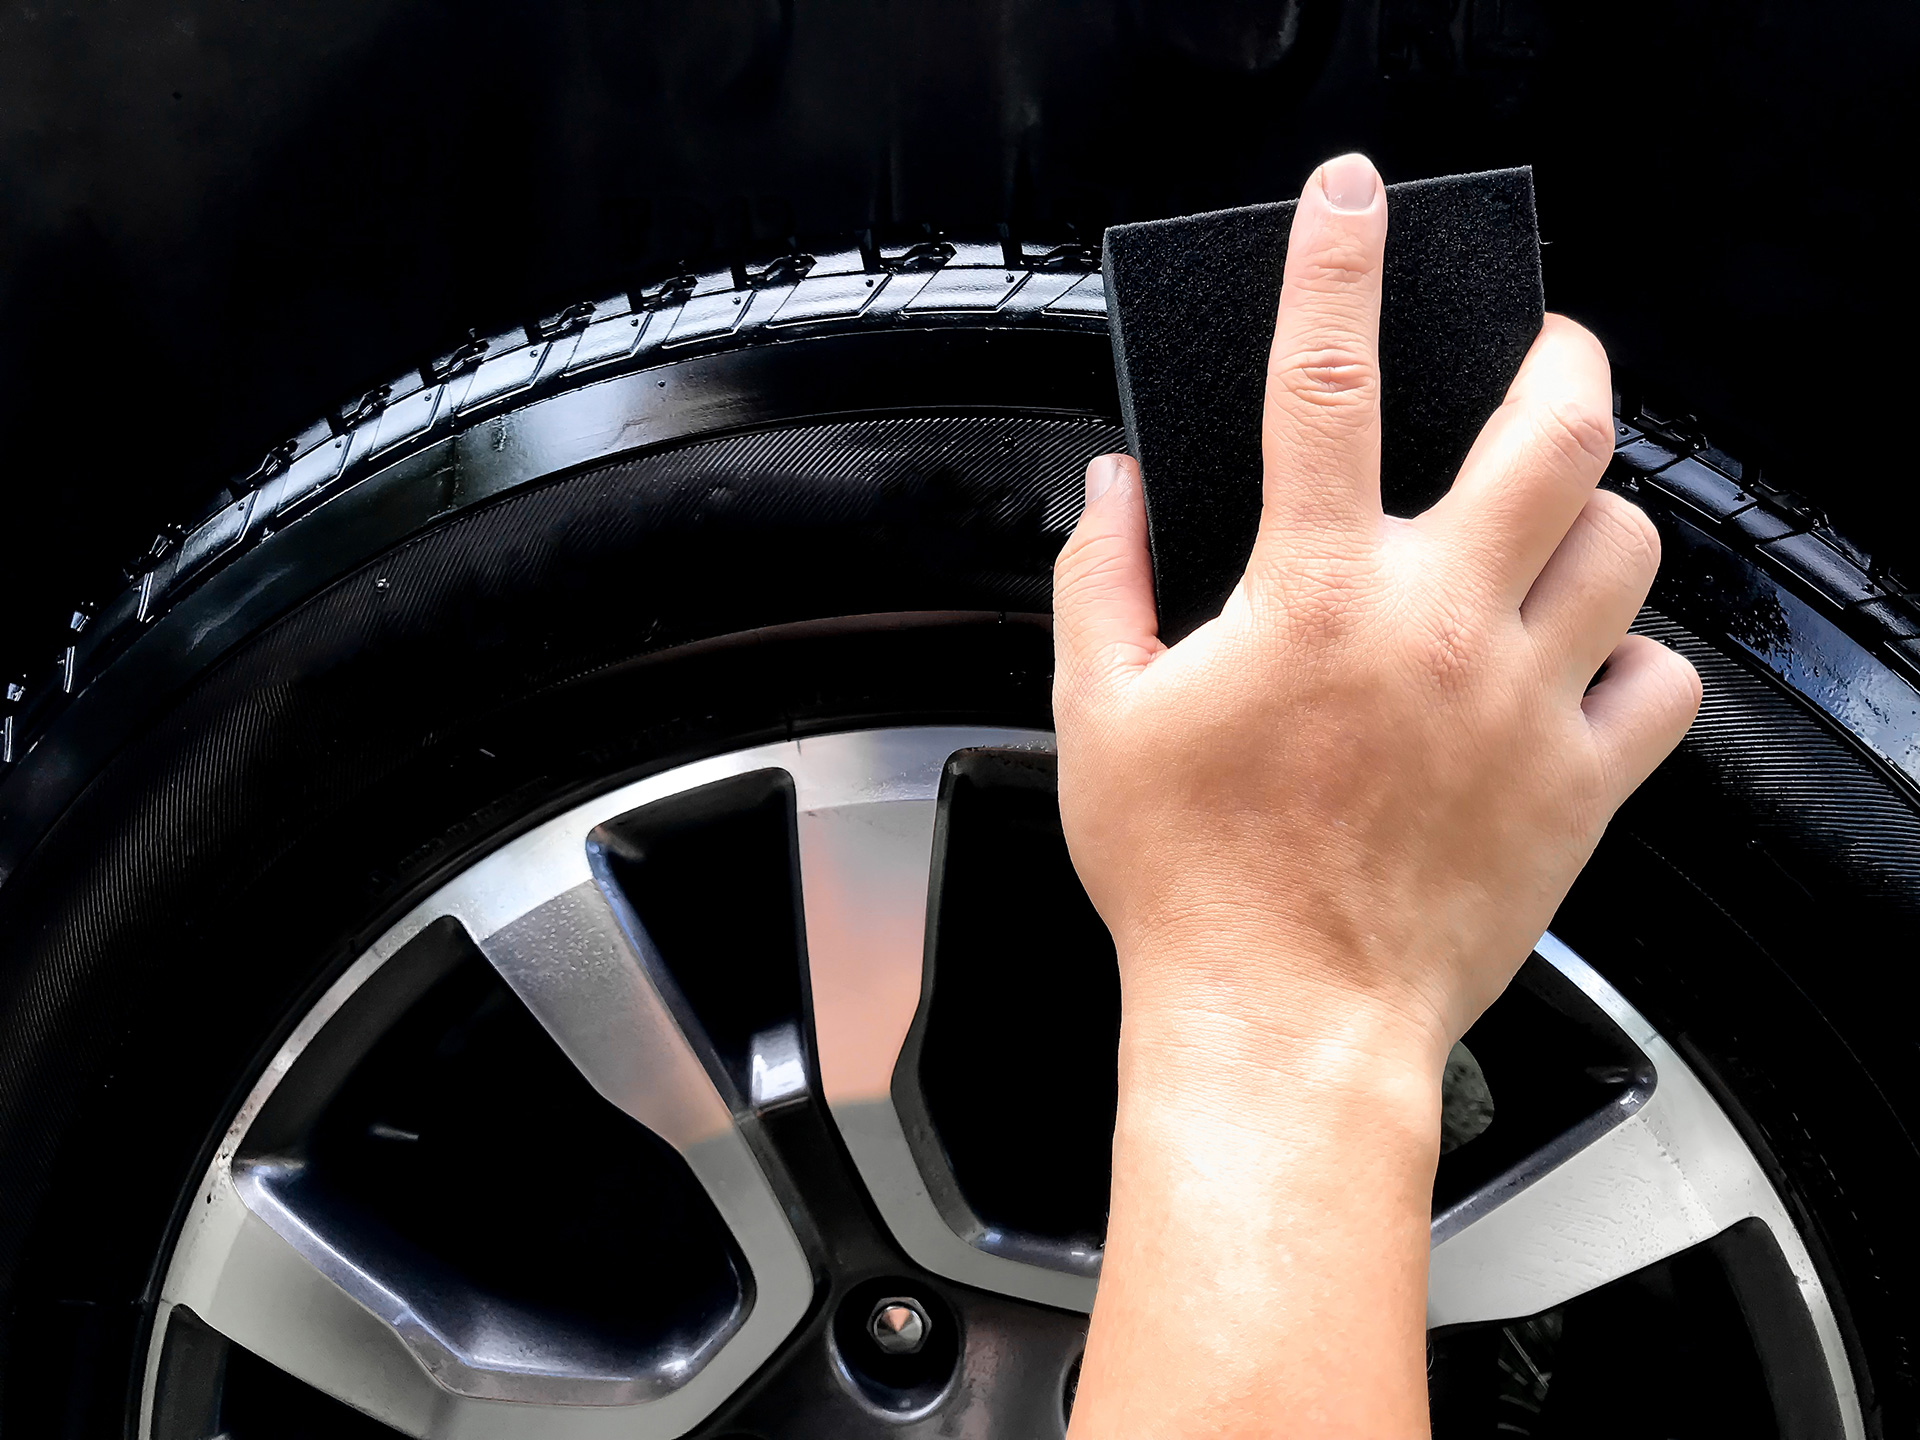 The 10 Best Tire Shines: Make Your Tires Look Brand New - ElectronicsHub